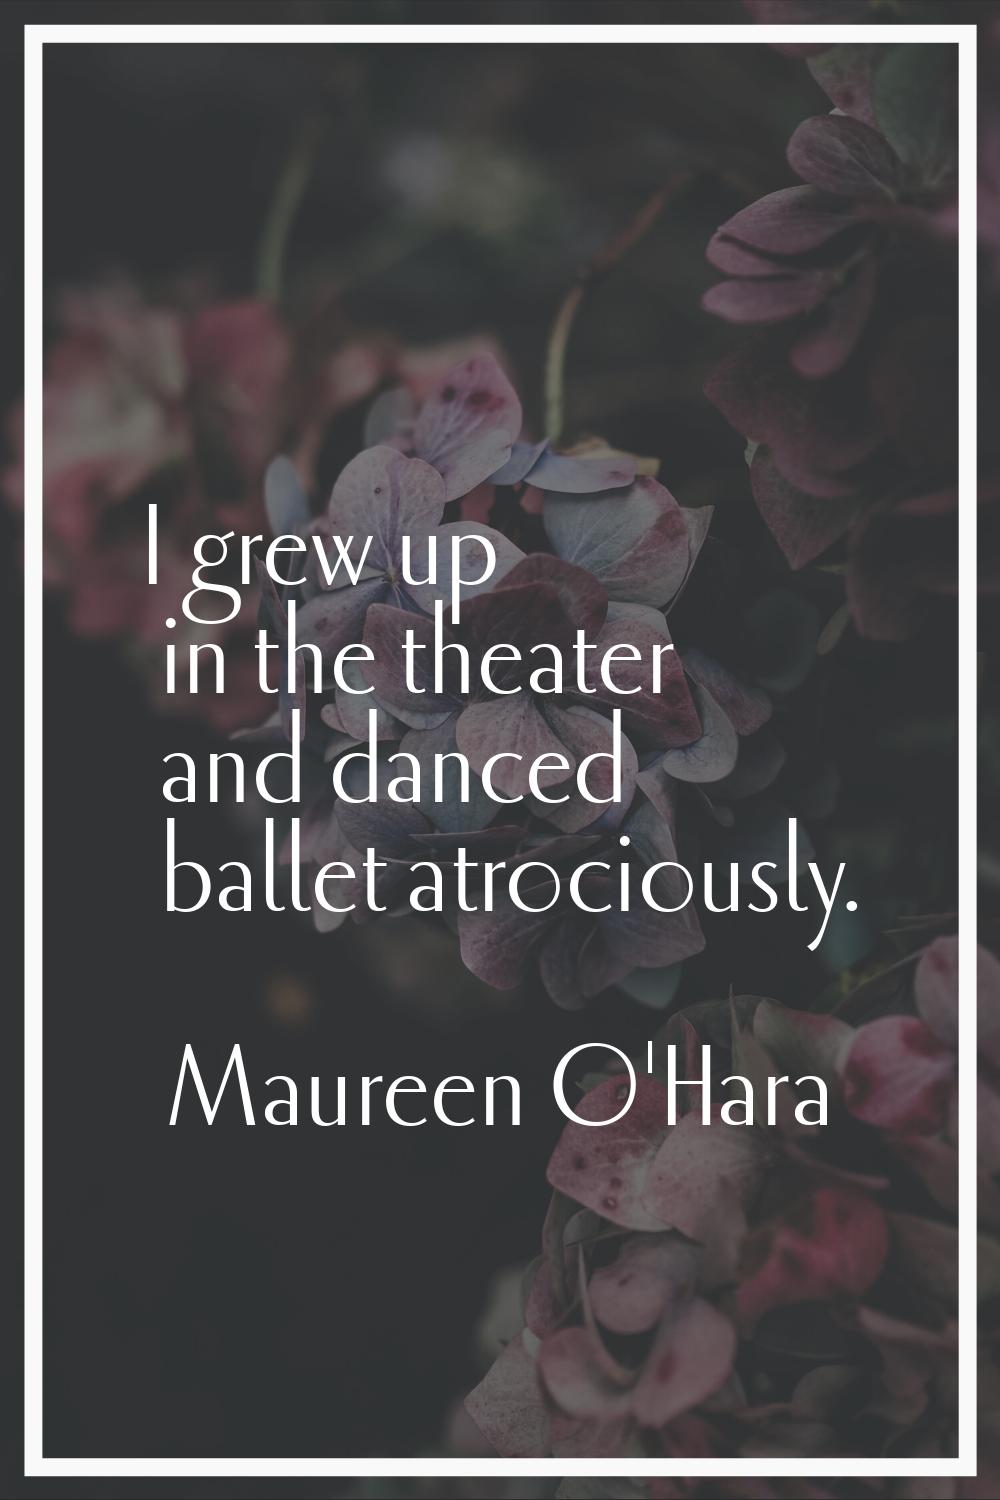 I grew up in the theater and danced ballet atrociously.